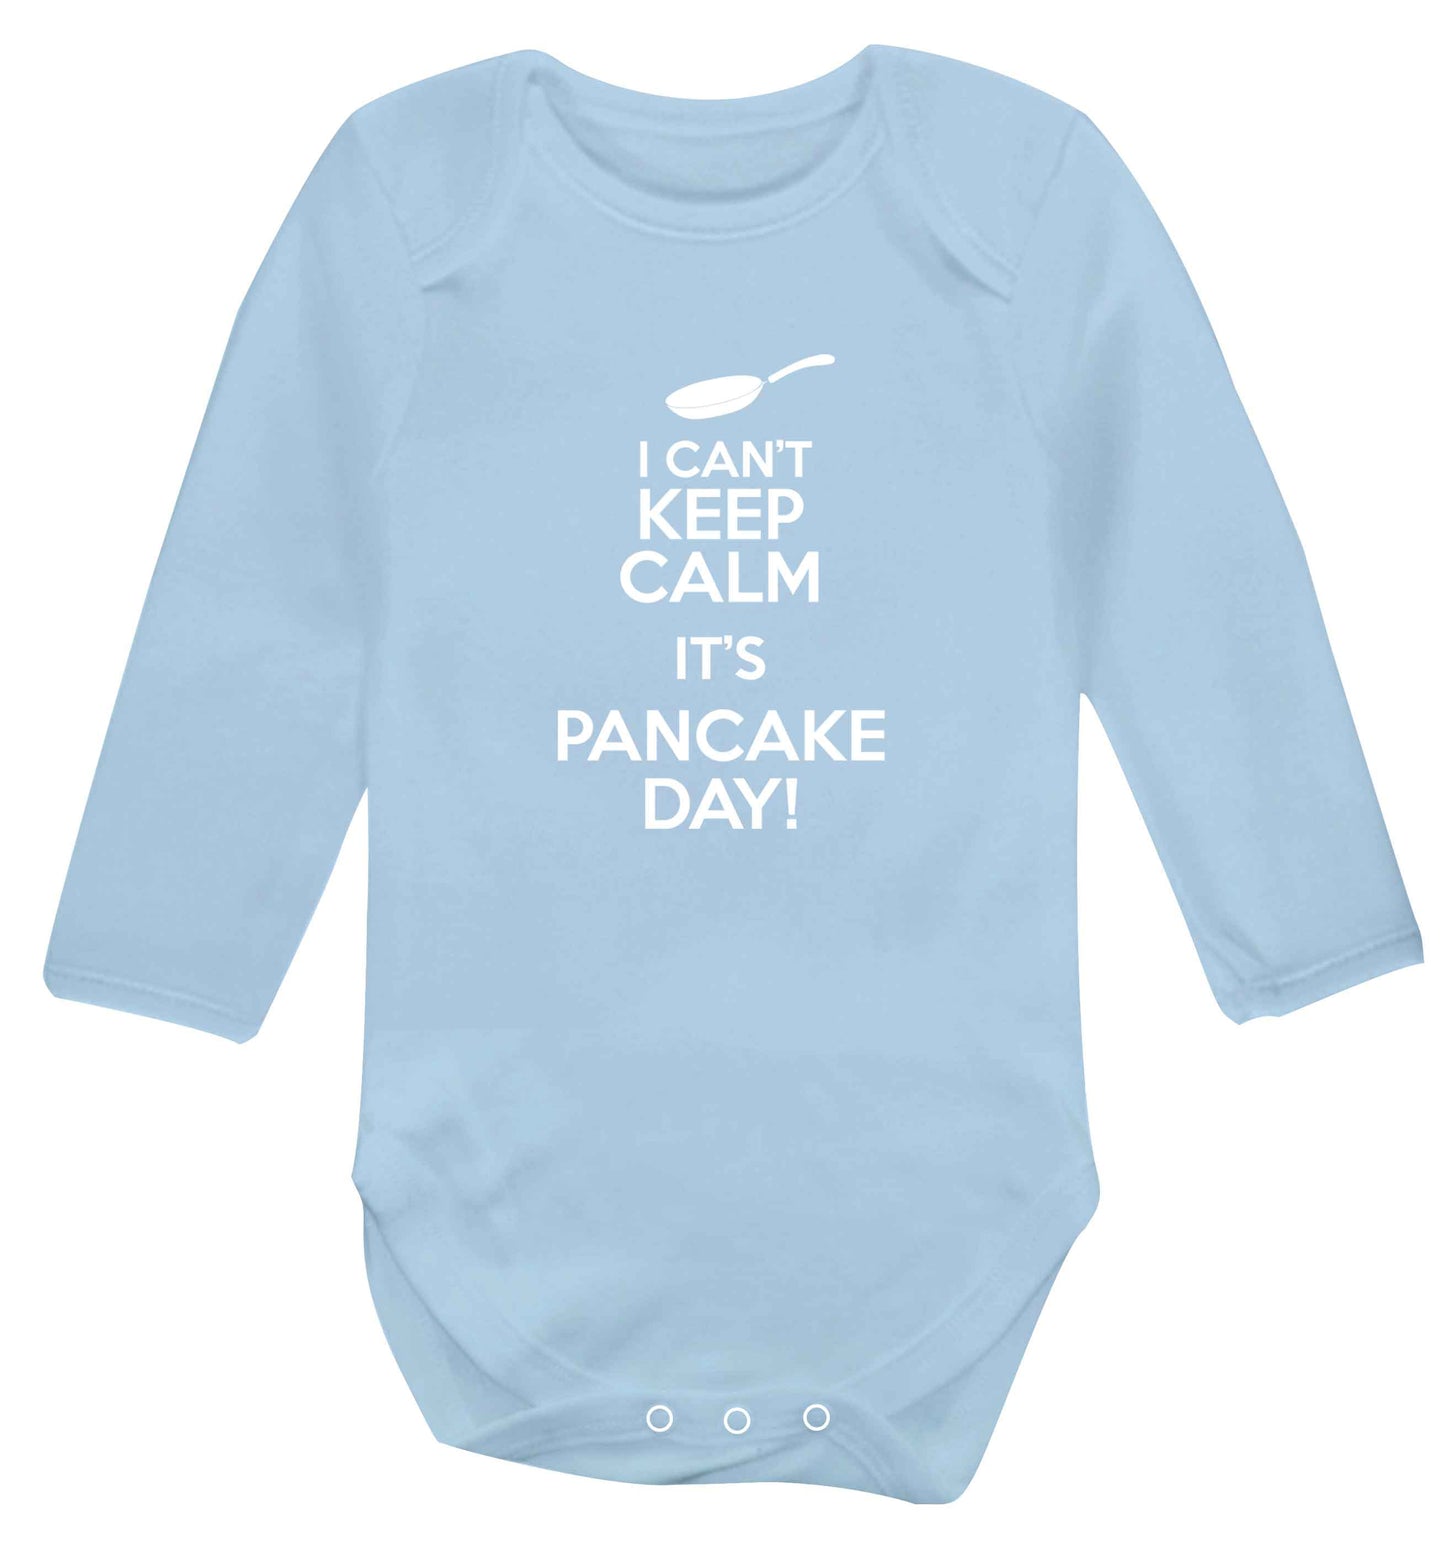 I can't keep calm it's pancake day! baby vest long sleeved pale blue 6-12 months